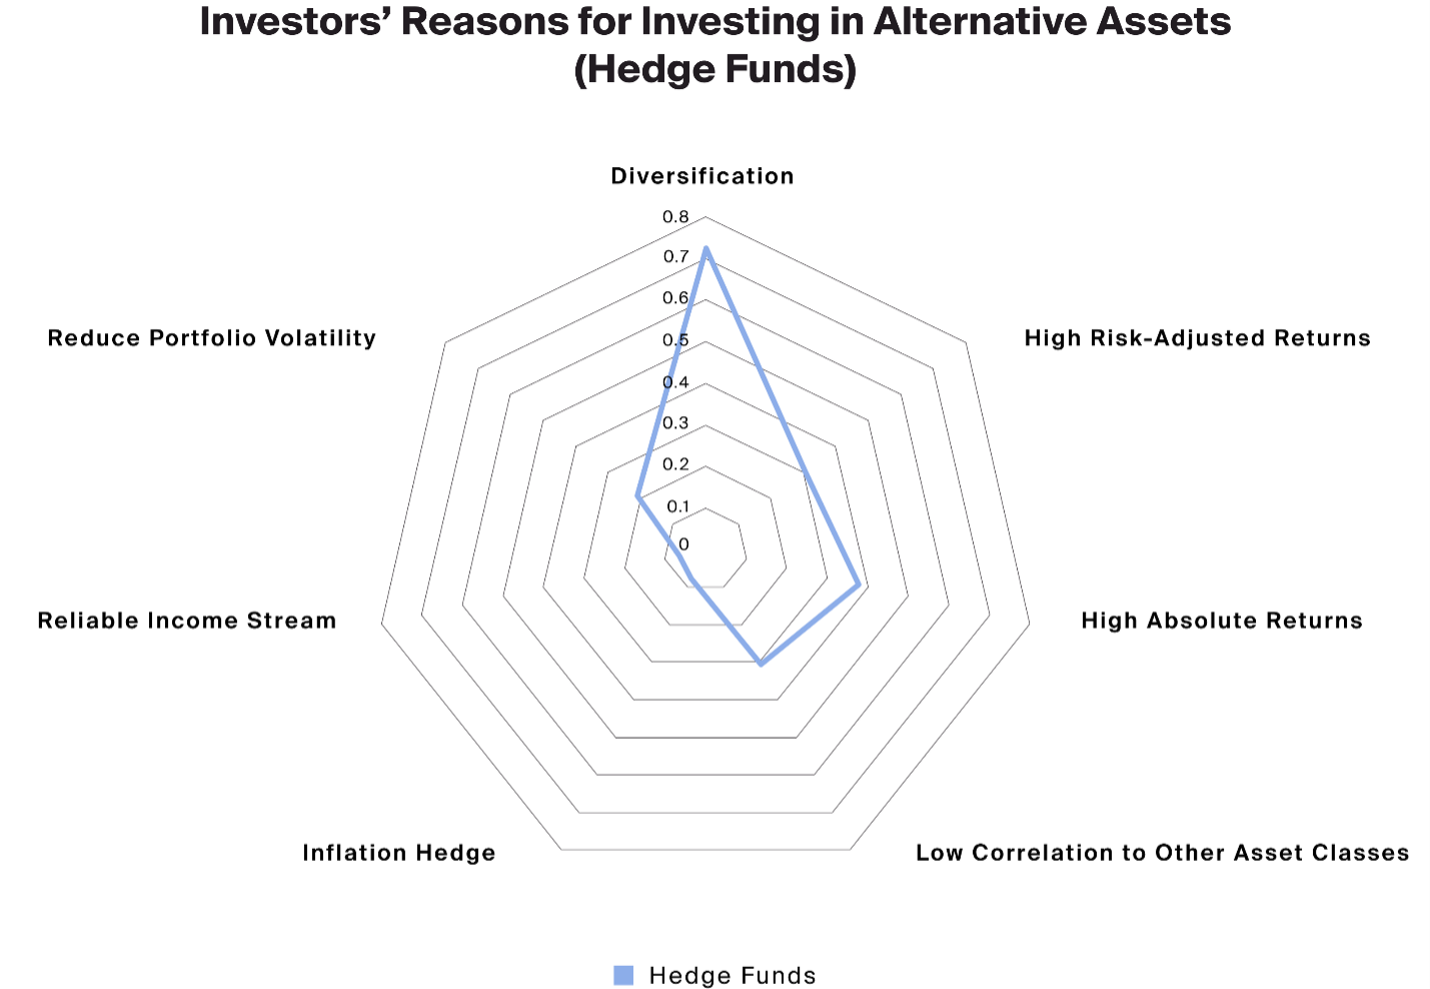 Exhibit 2: Investors tend to allocate to hedge funds seeking diversification, higher absolute returns and low correlation to other assets